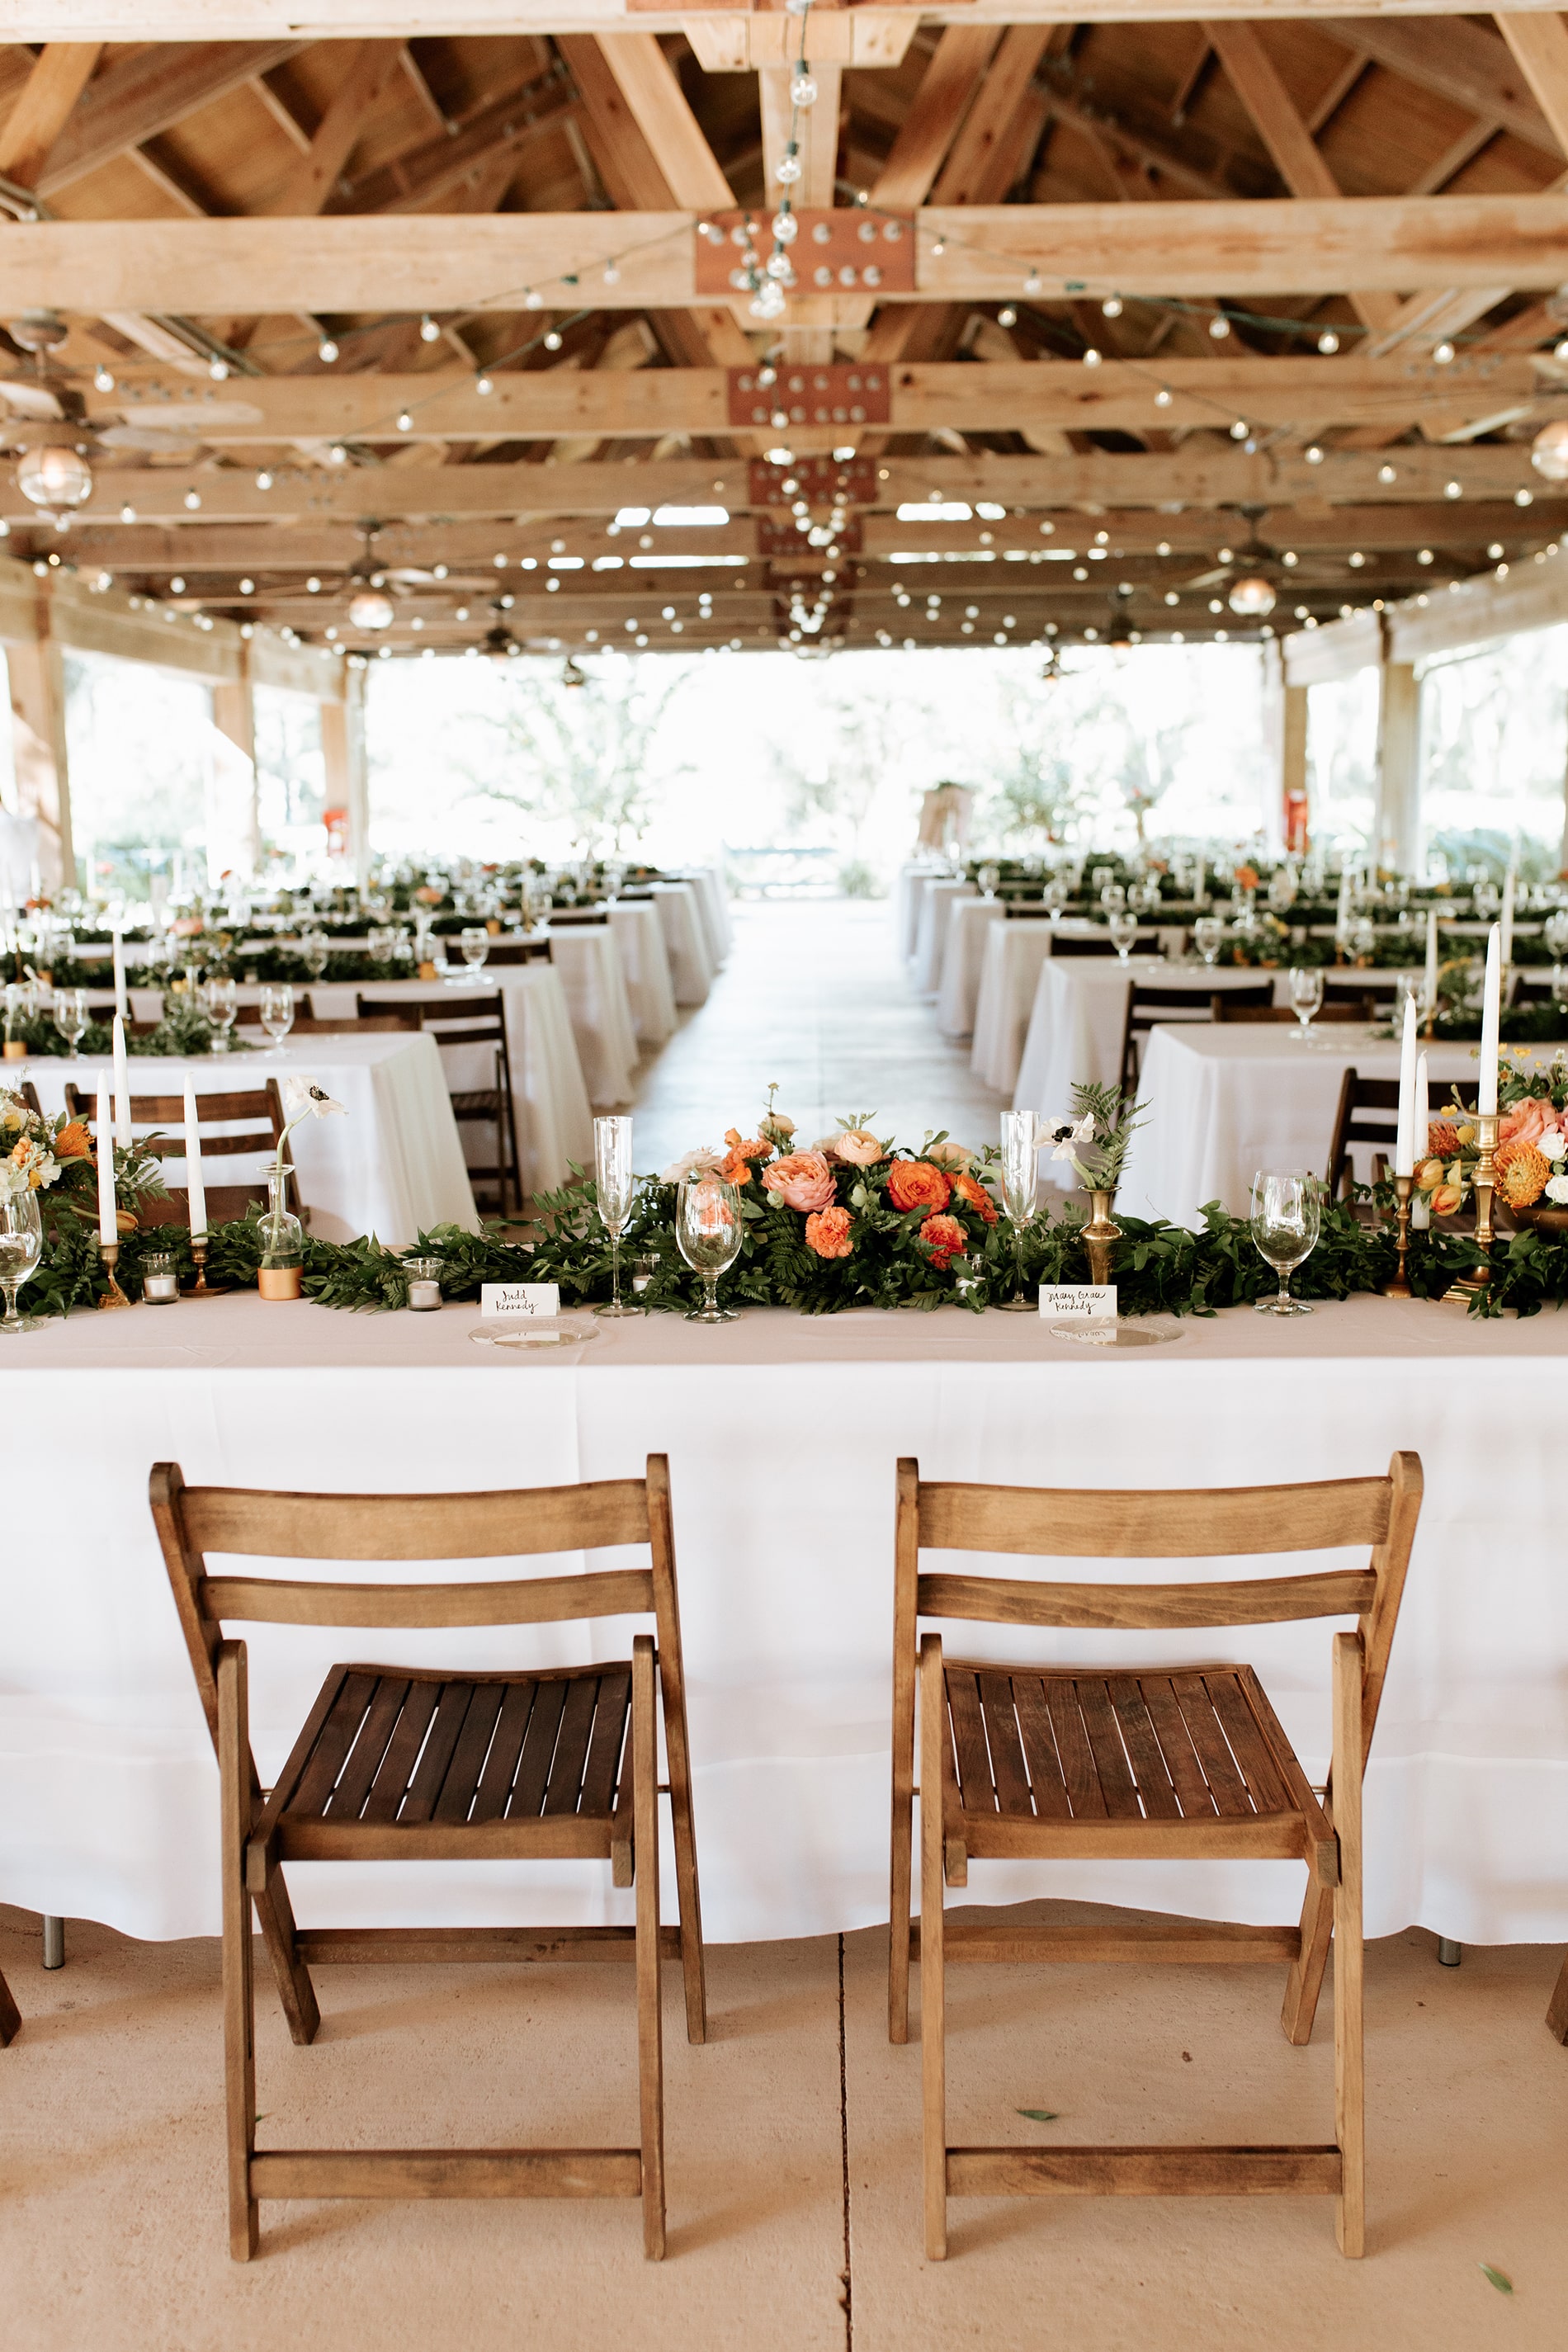 lowcountry-kitchen-catering-beaufort-sc-mary-grace-and-judd-kennedy-wedding-ceremony-tables-chairs-min.jpg